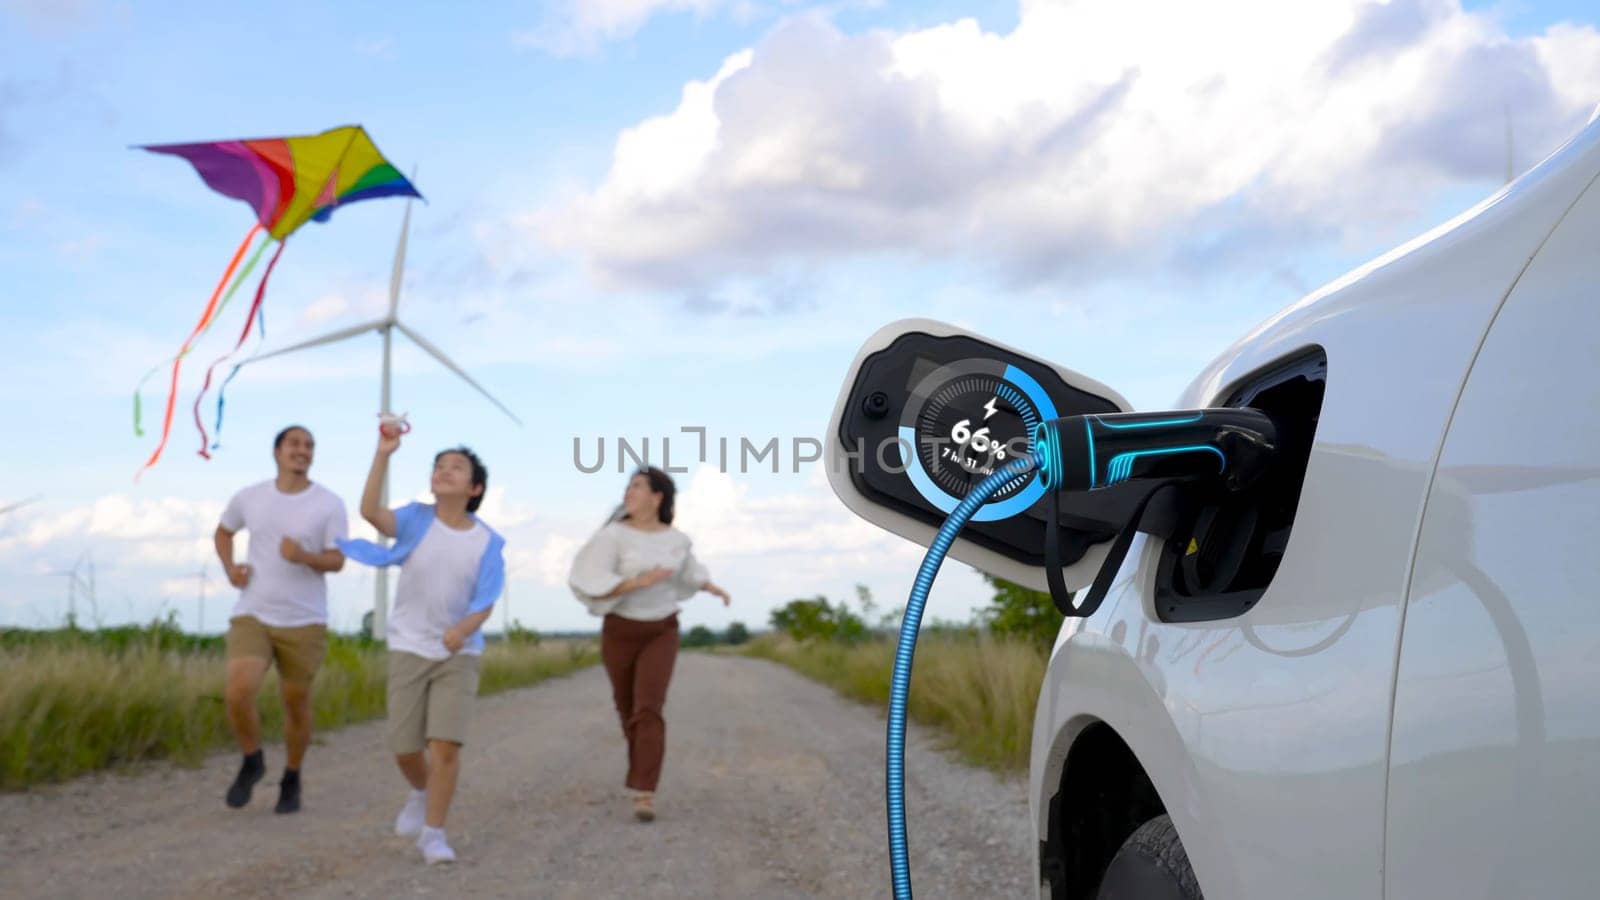 Focus eco-friendly EV car recharging display battery status hologram, charging station using eco-friendly energy wind turbine generator with happy family playing kite together in background. Peruse